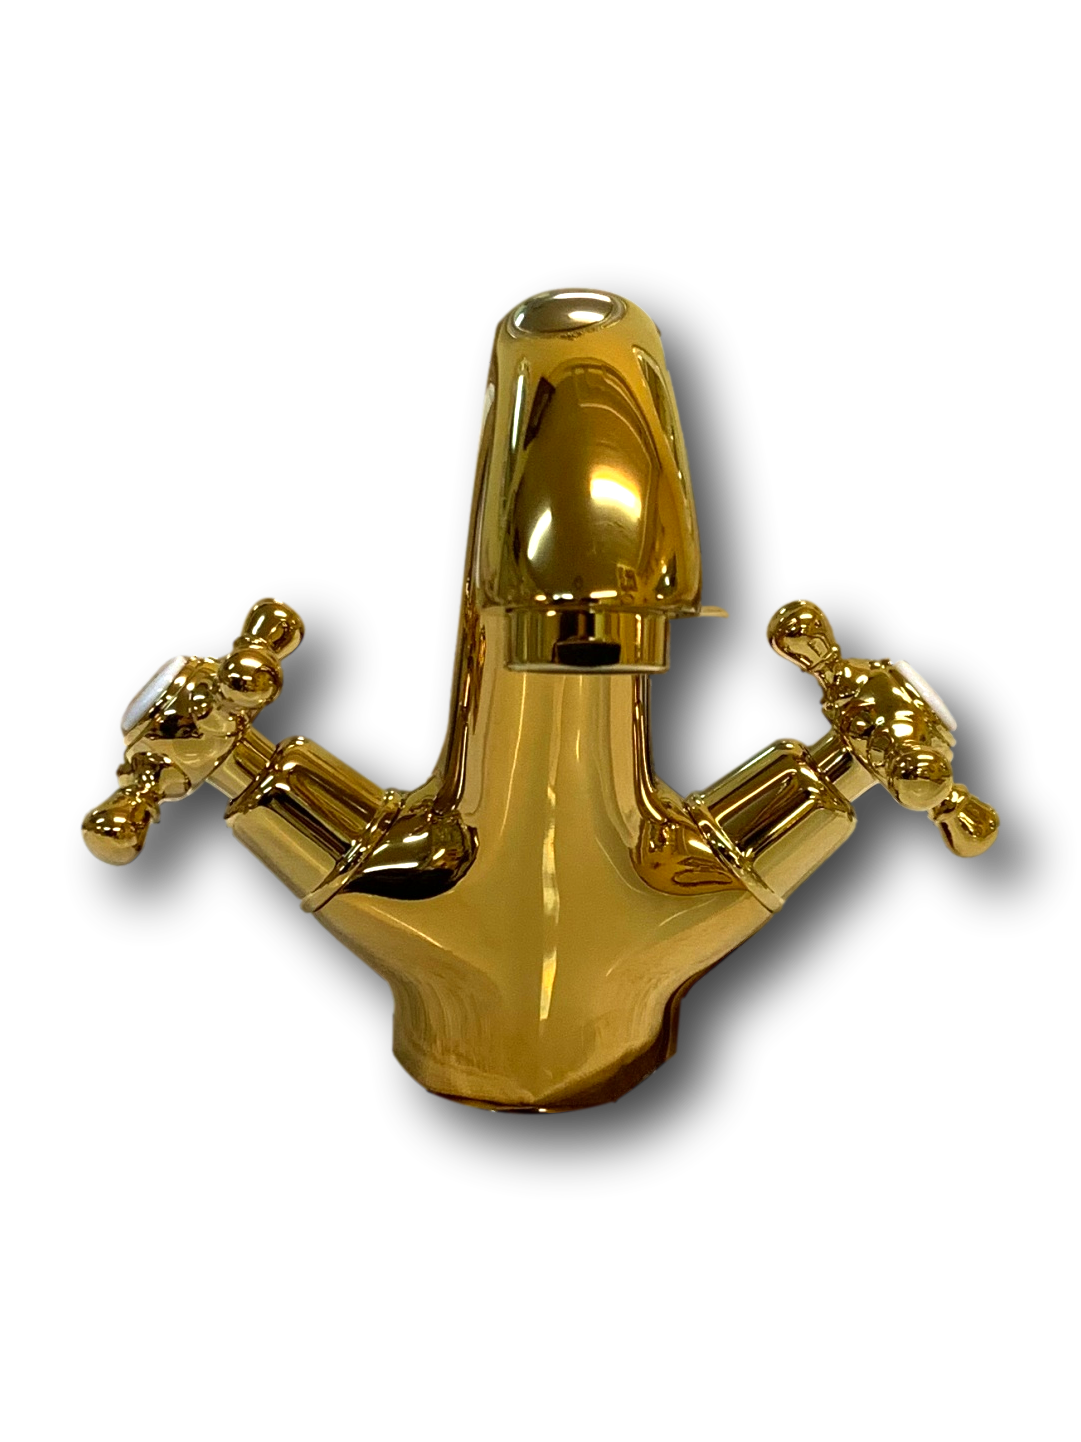 Luxury Swan Bathroom Faucet Gold Plated